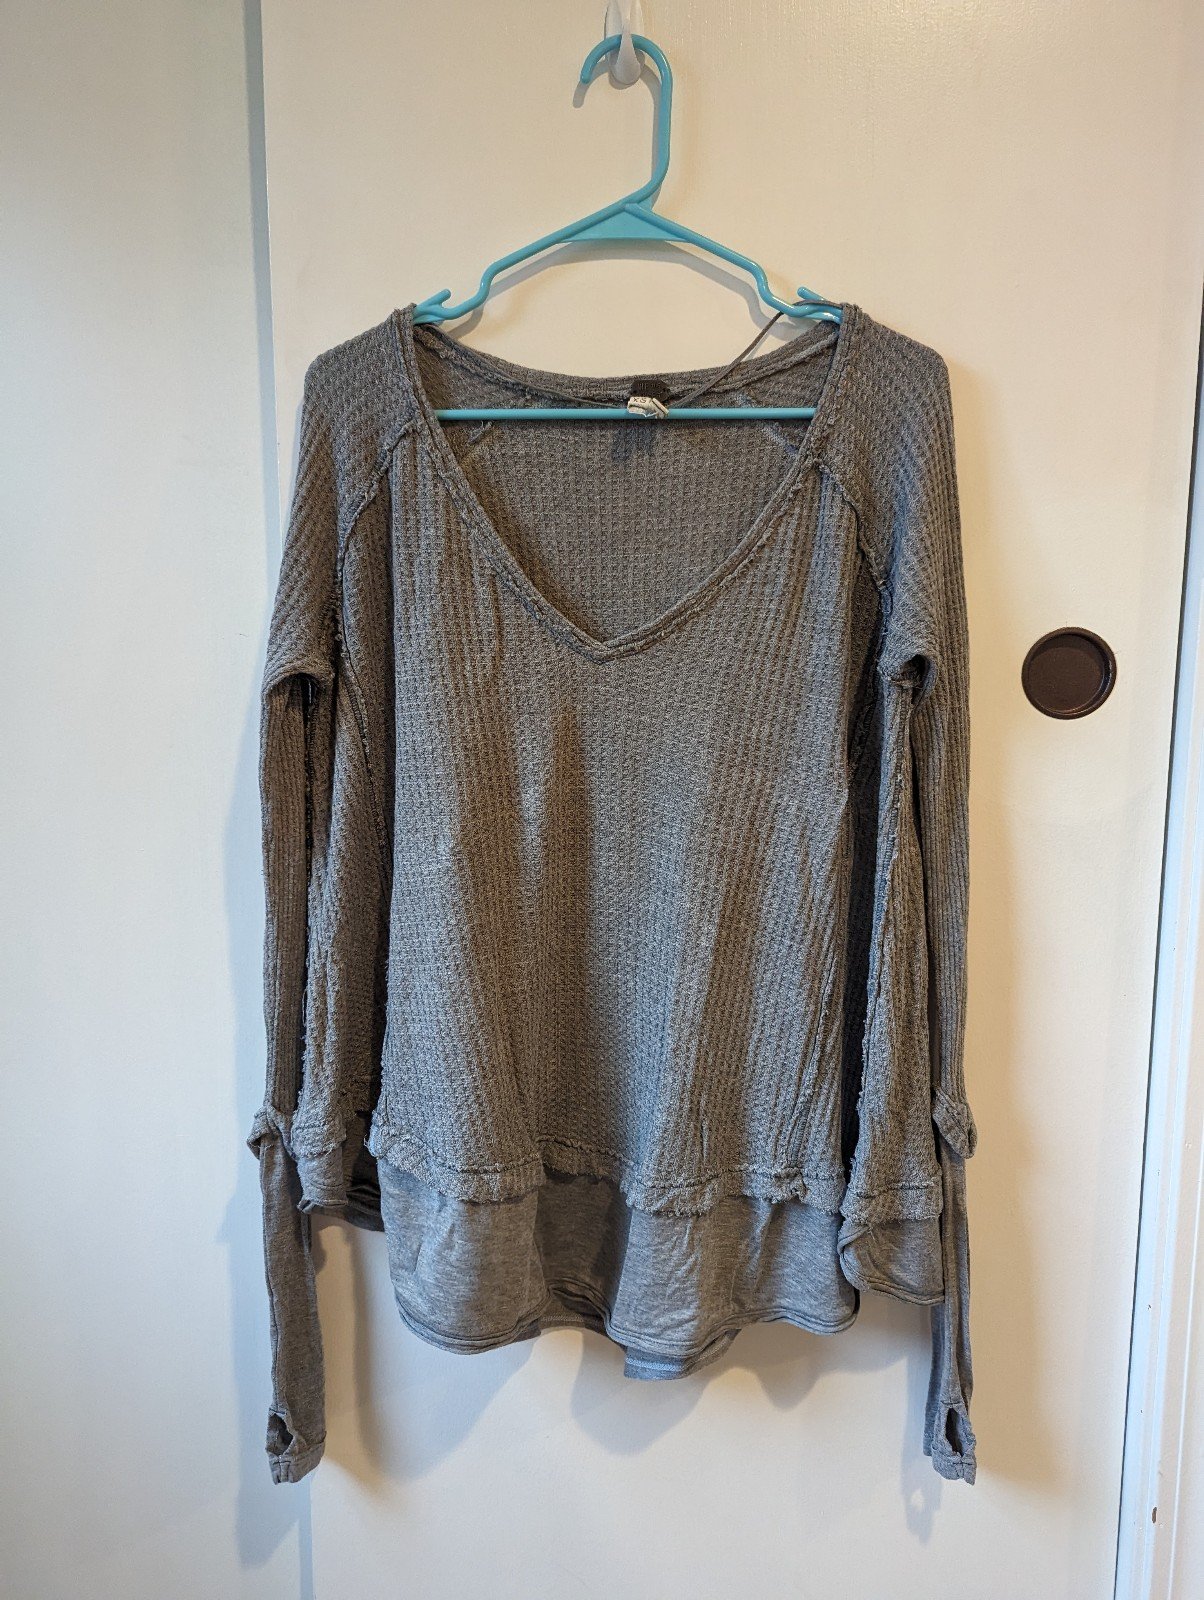 Wholesale price Cozy Free People Top Mom1KNqb0 Cool